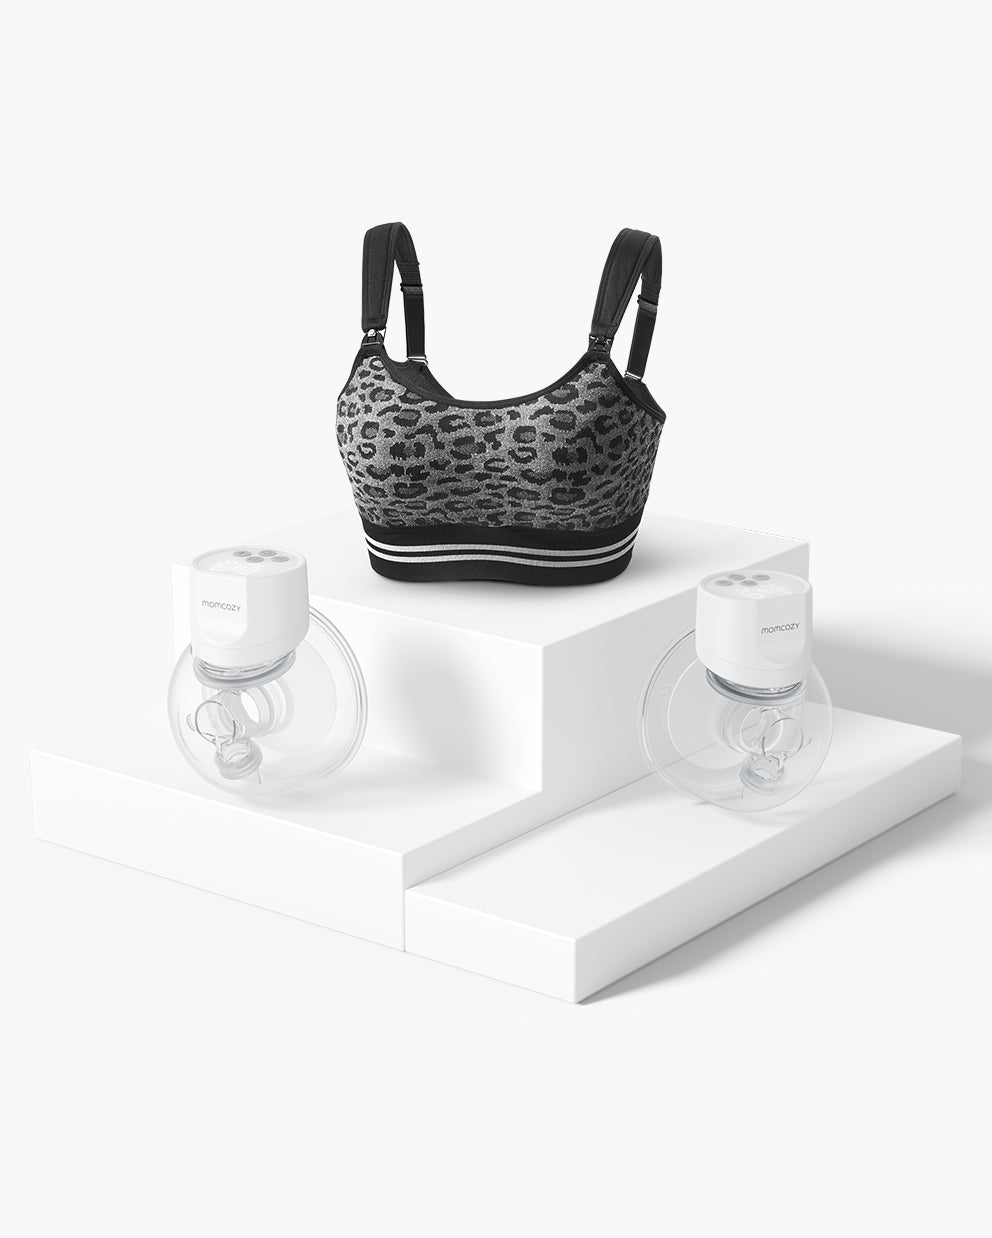 Momcozy S12 Pro Wearable Breast Pump, Double Hands-Free Pump 741157985405